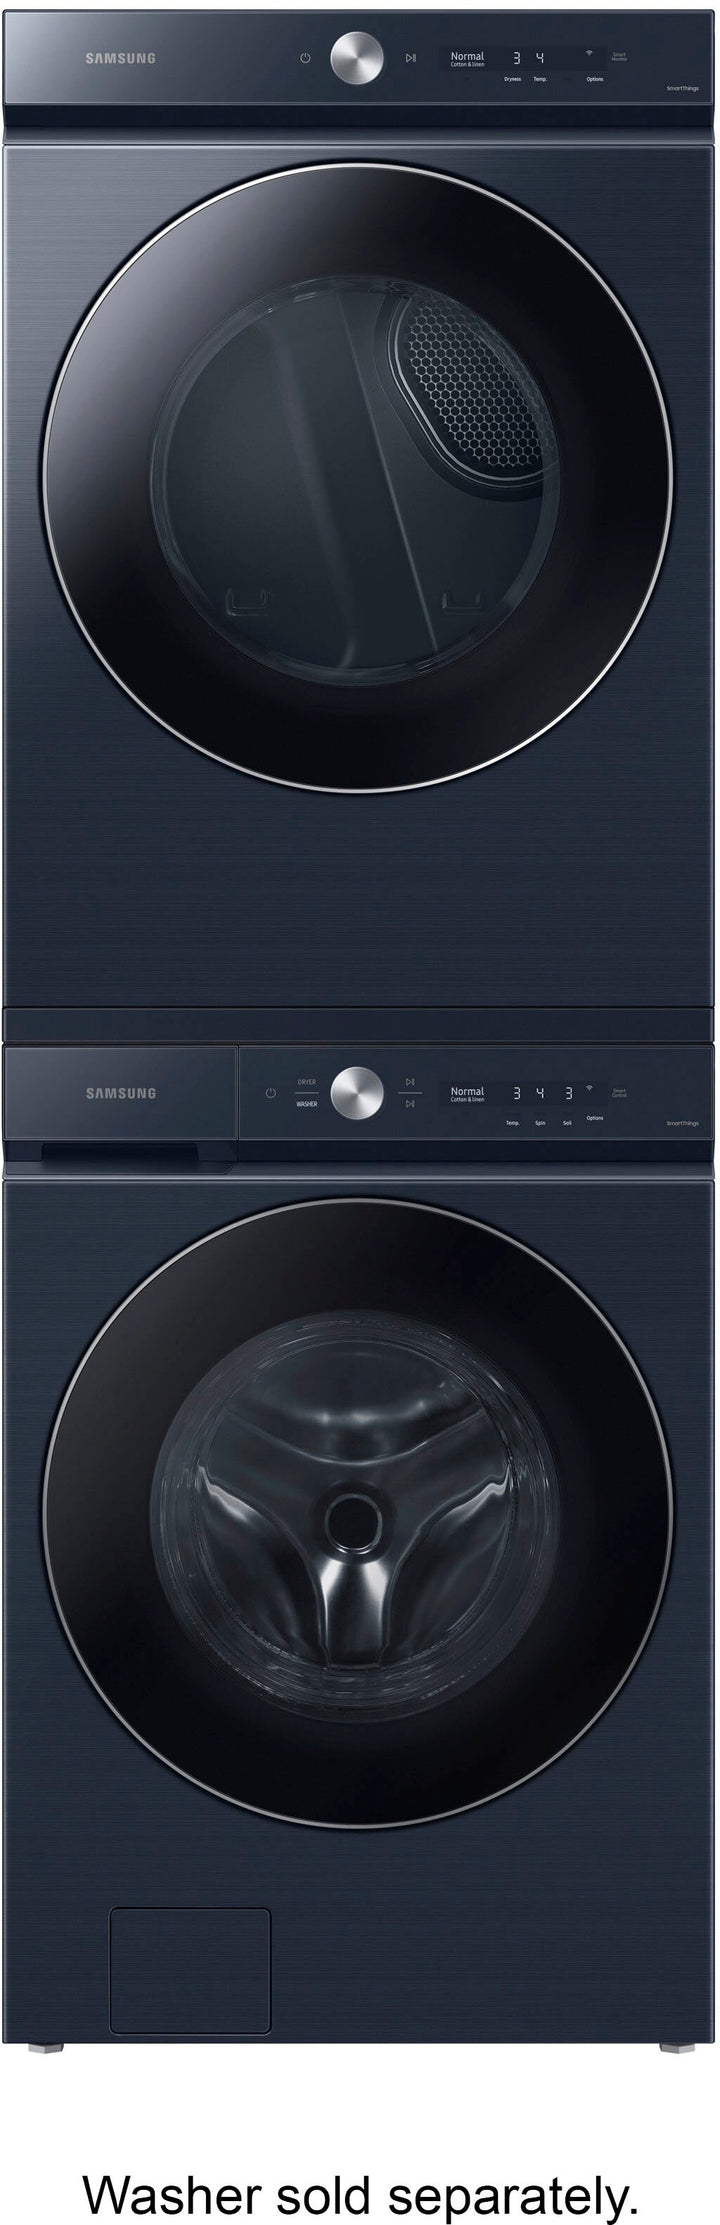 Samsung - Bespoke 7.6 cu. ft. Ultra Capacity Gas Dryer with AI Optimal Dry and Super Speed Dry - Brushed navy_10